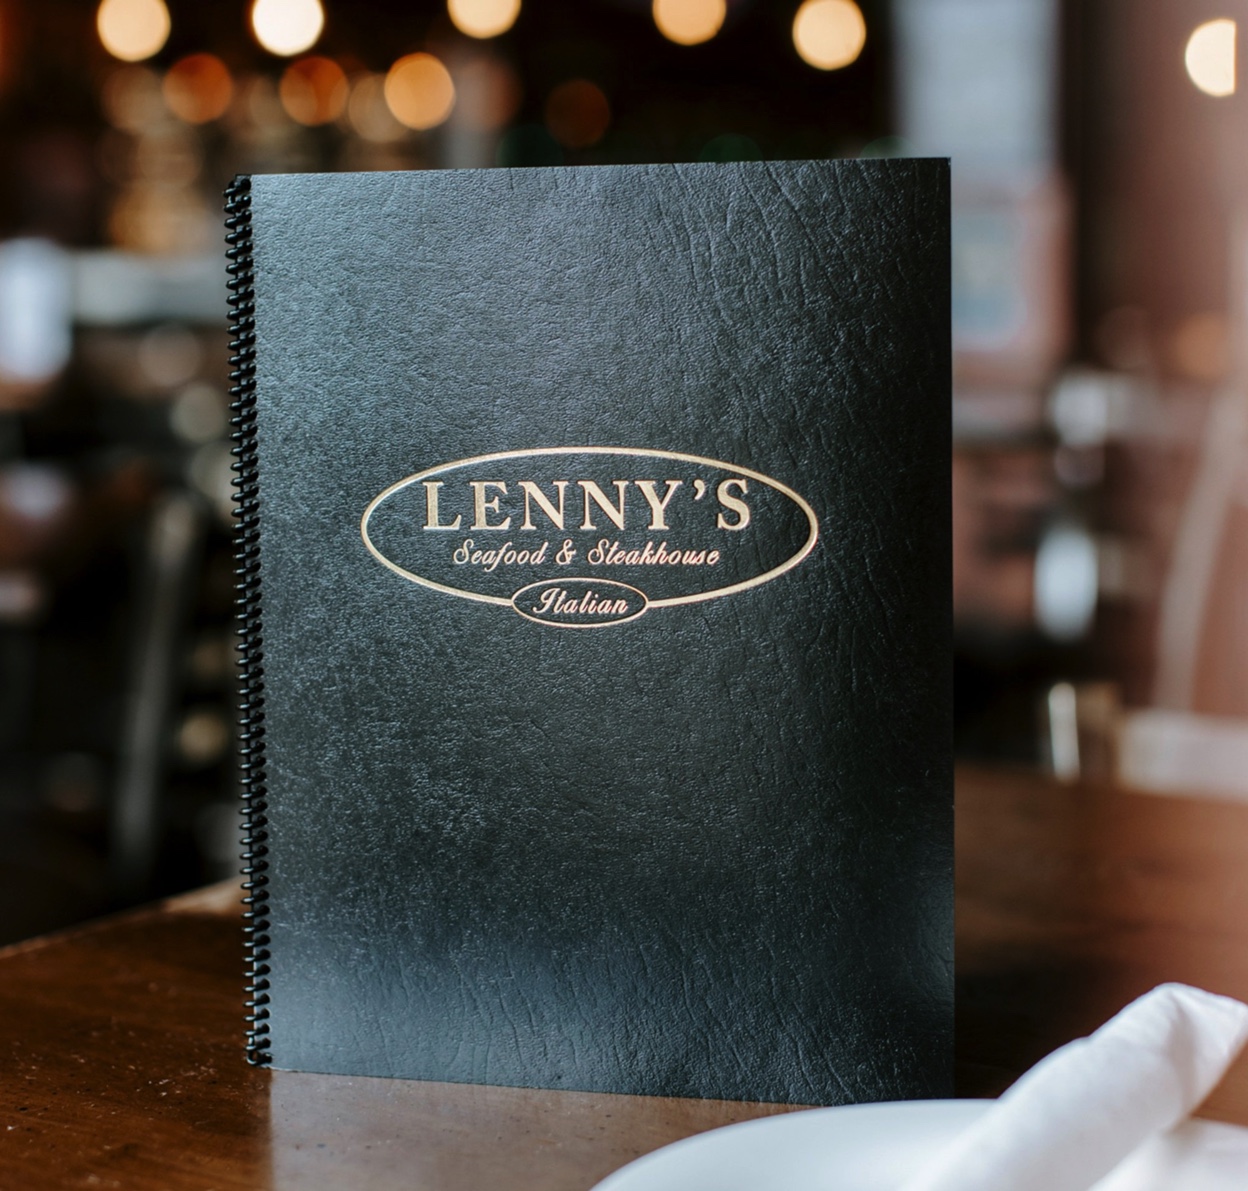 Lenny's Seafood Steakhouse